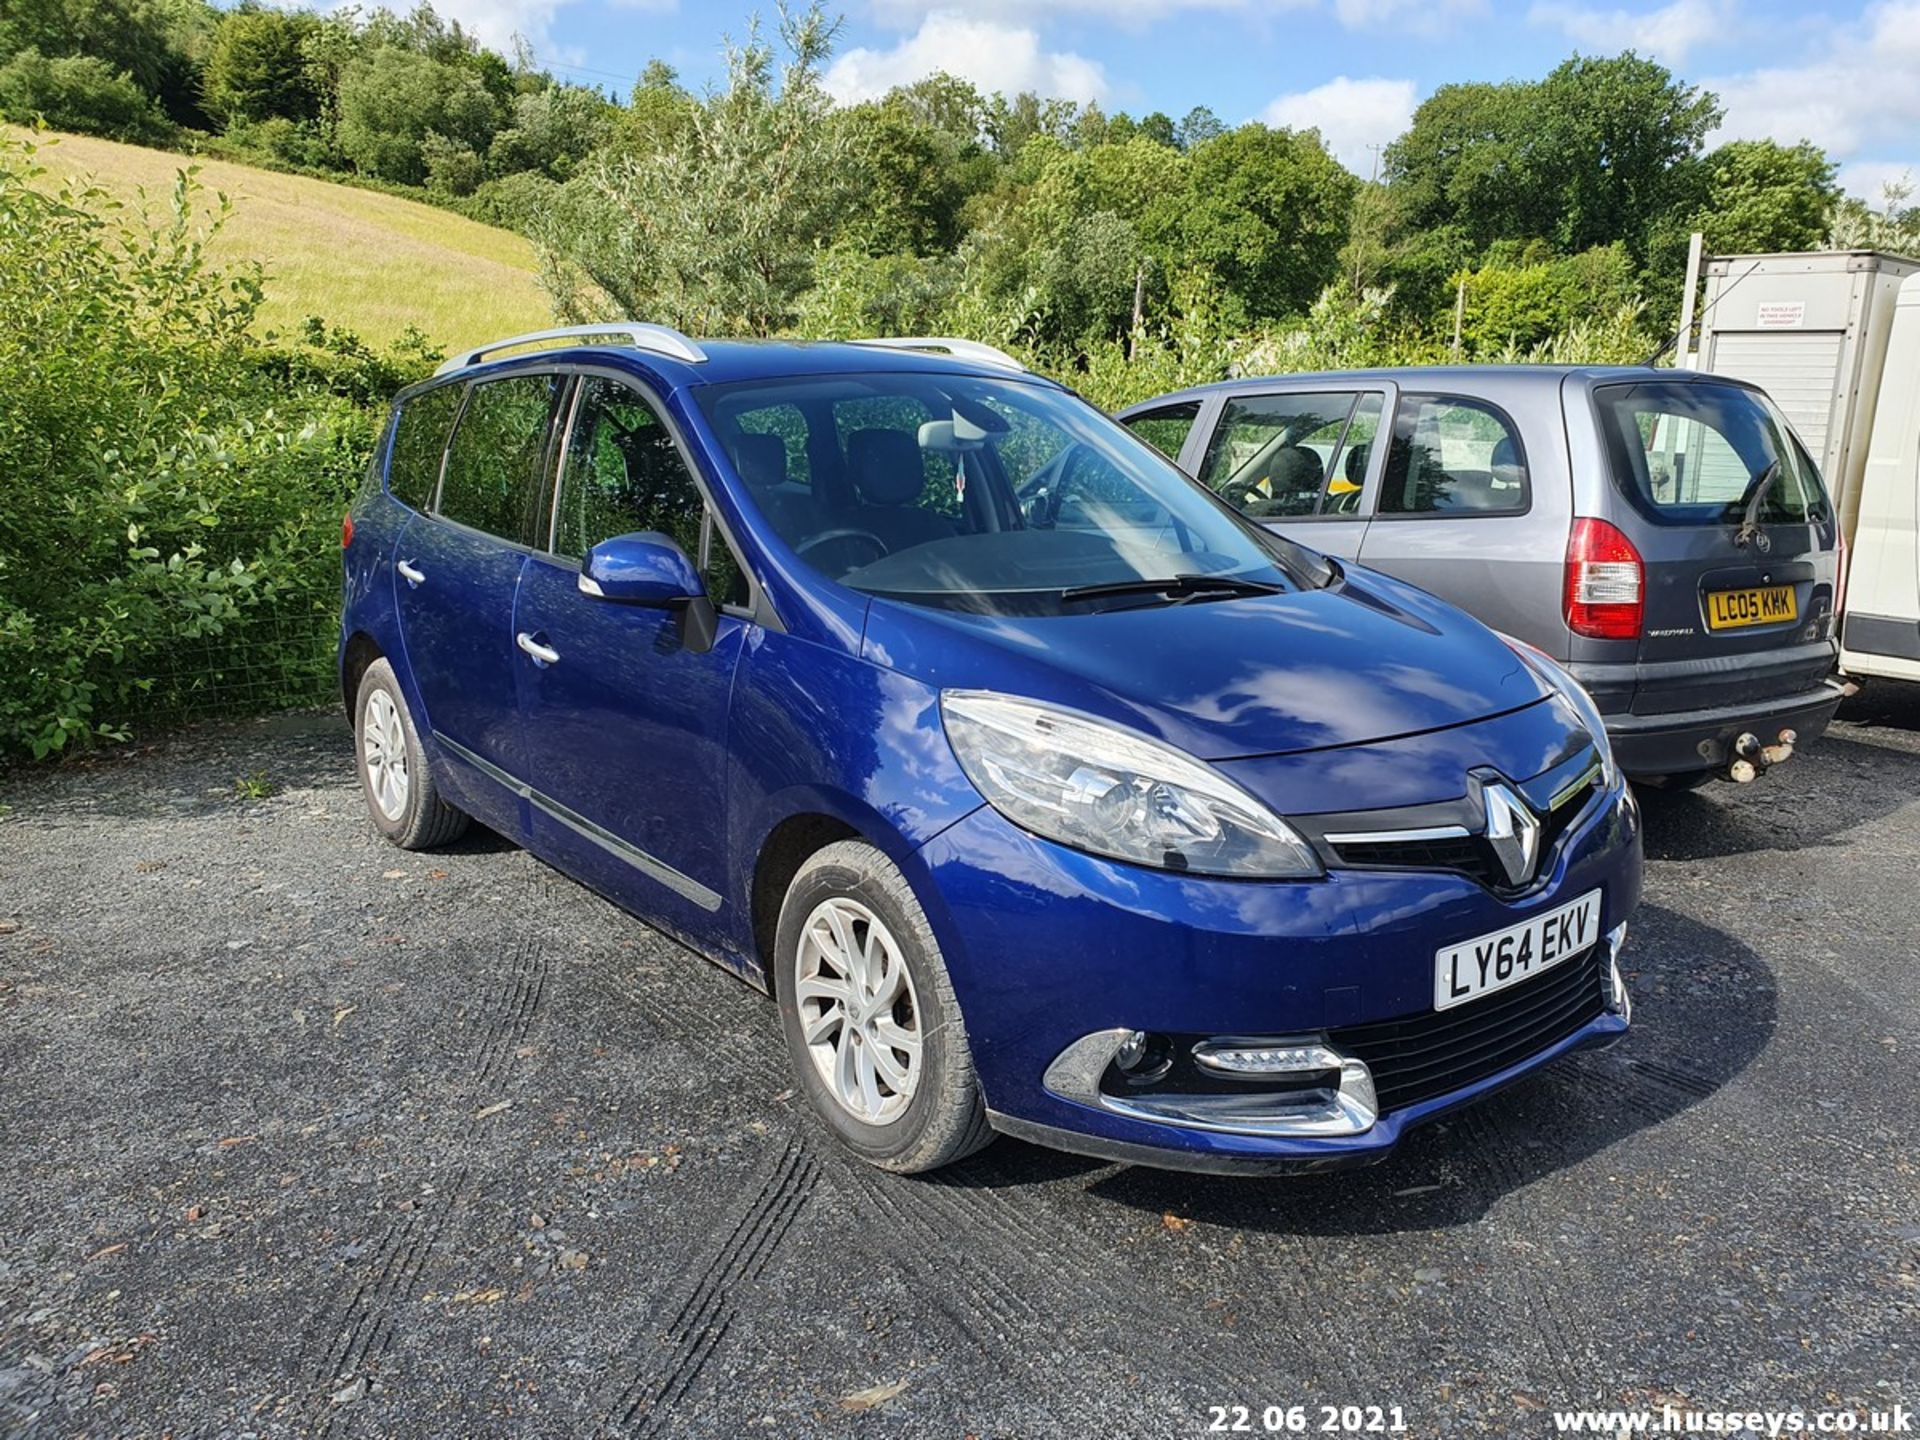 14/64 RENAULT GRAND SCENIC DY-QUE T-T D - 1461cc 5dr MPV (Blue, 152k) - Image 2 of 23